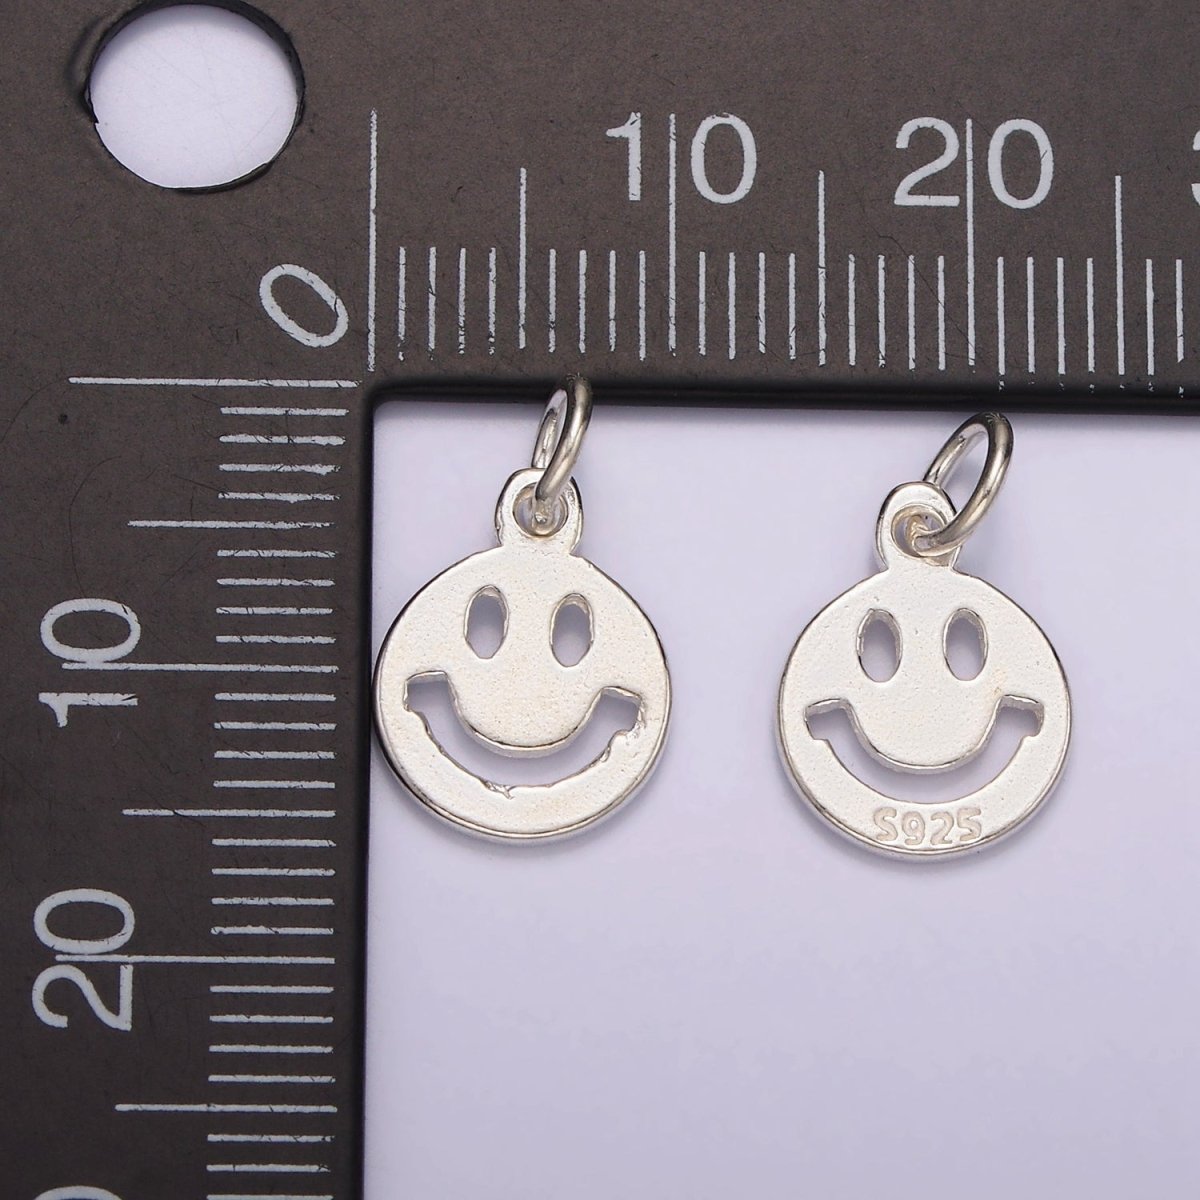 S925 Sterling Silver Smiley Face Open Round Charm | SL-418 - DLUXCA